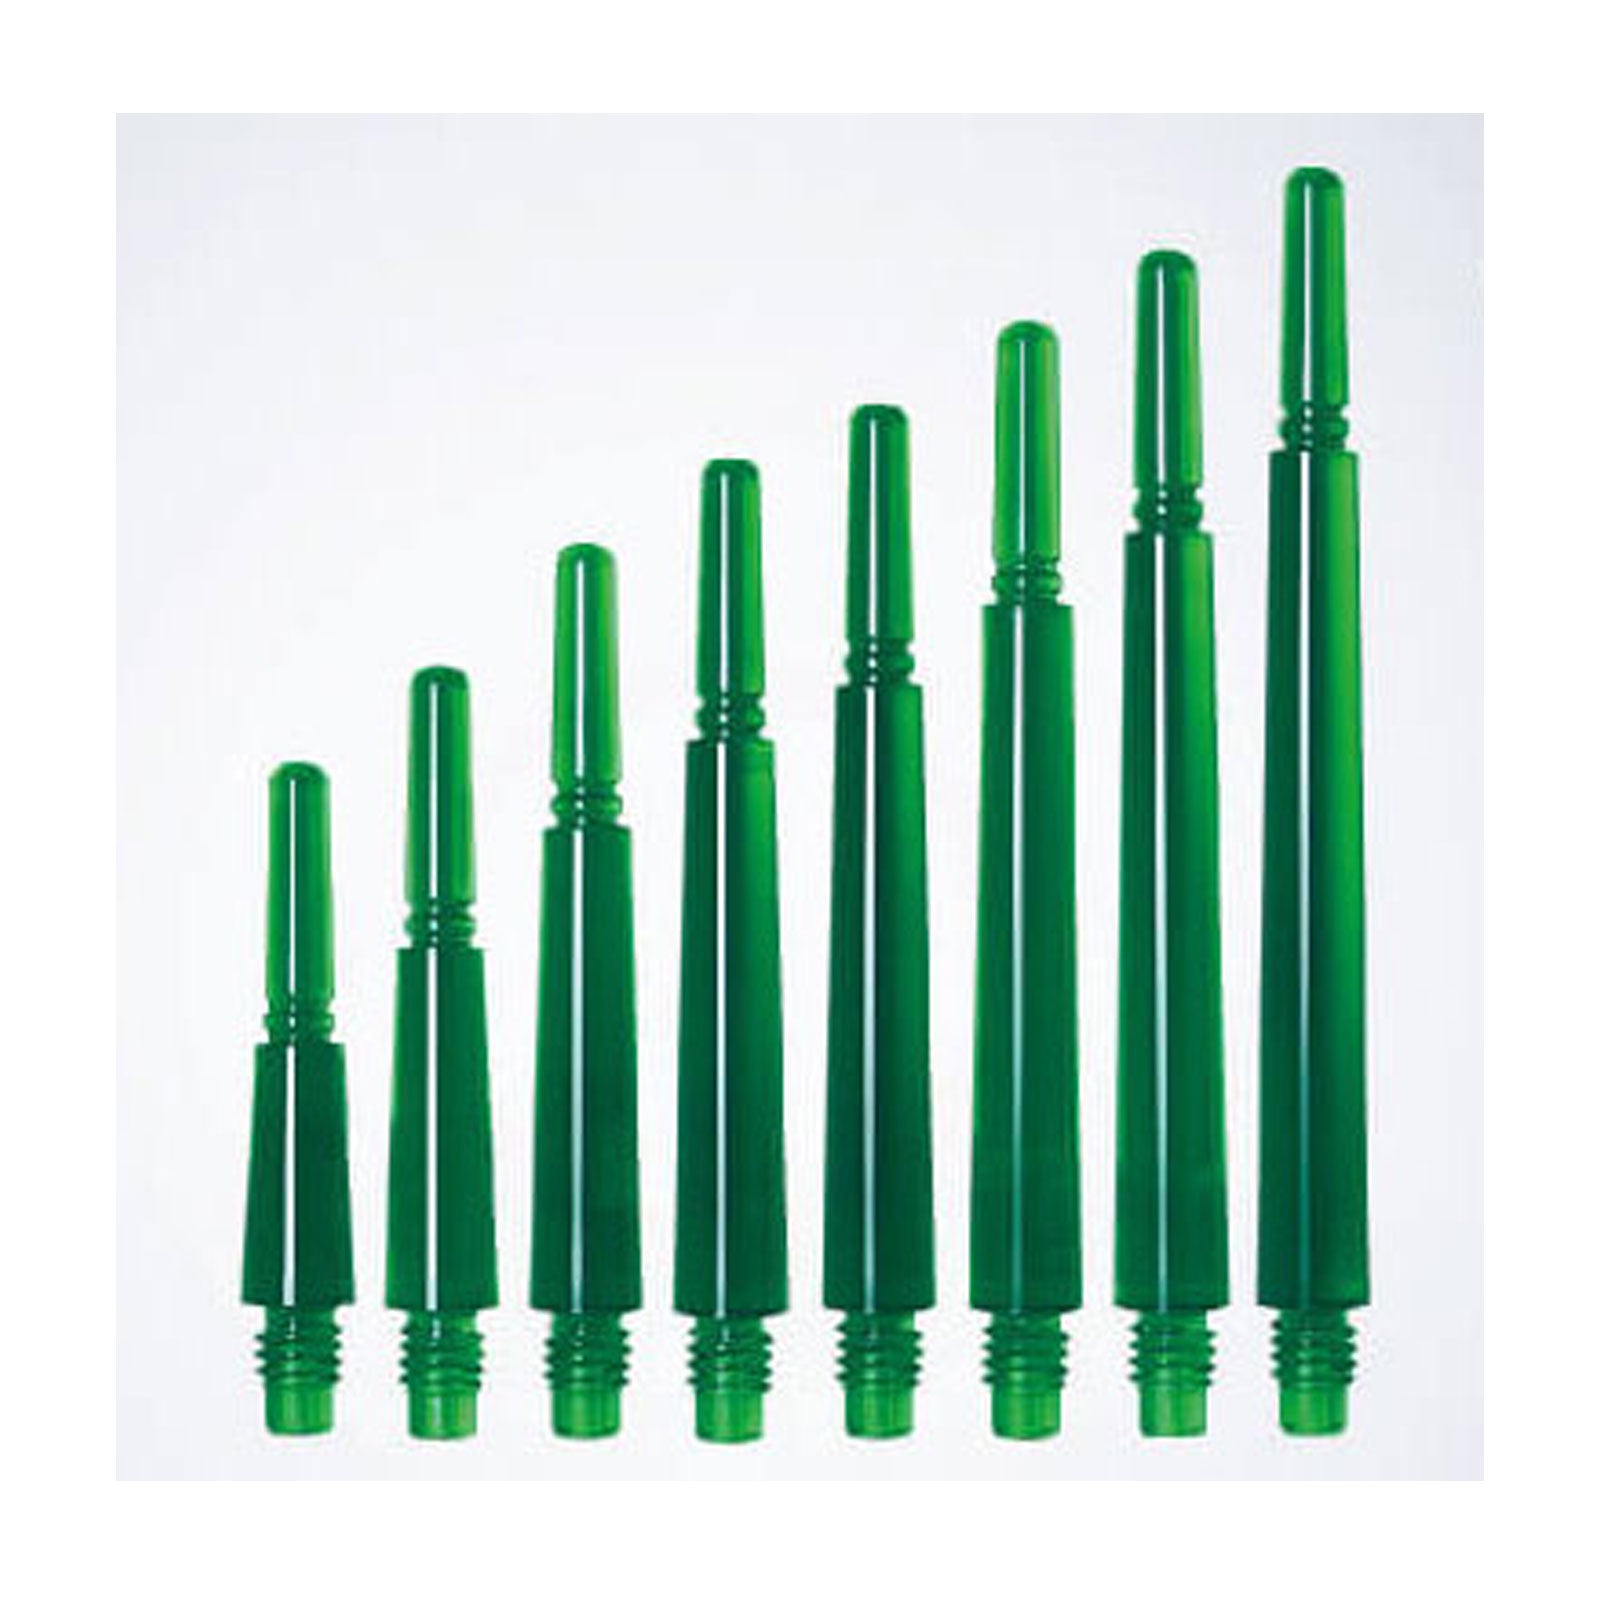 Cosmo Stems - Normal Locked Clear Green Shafts - Sizes 1 - 8